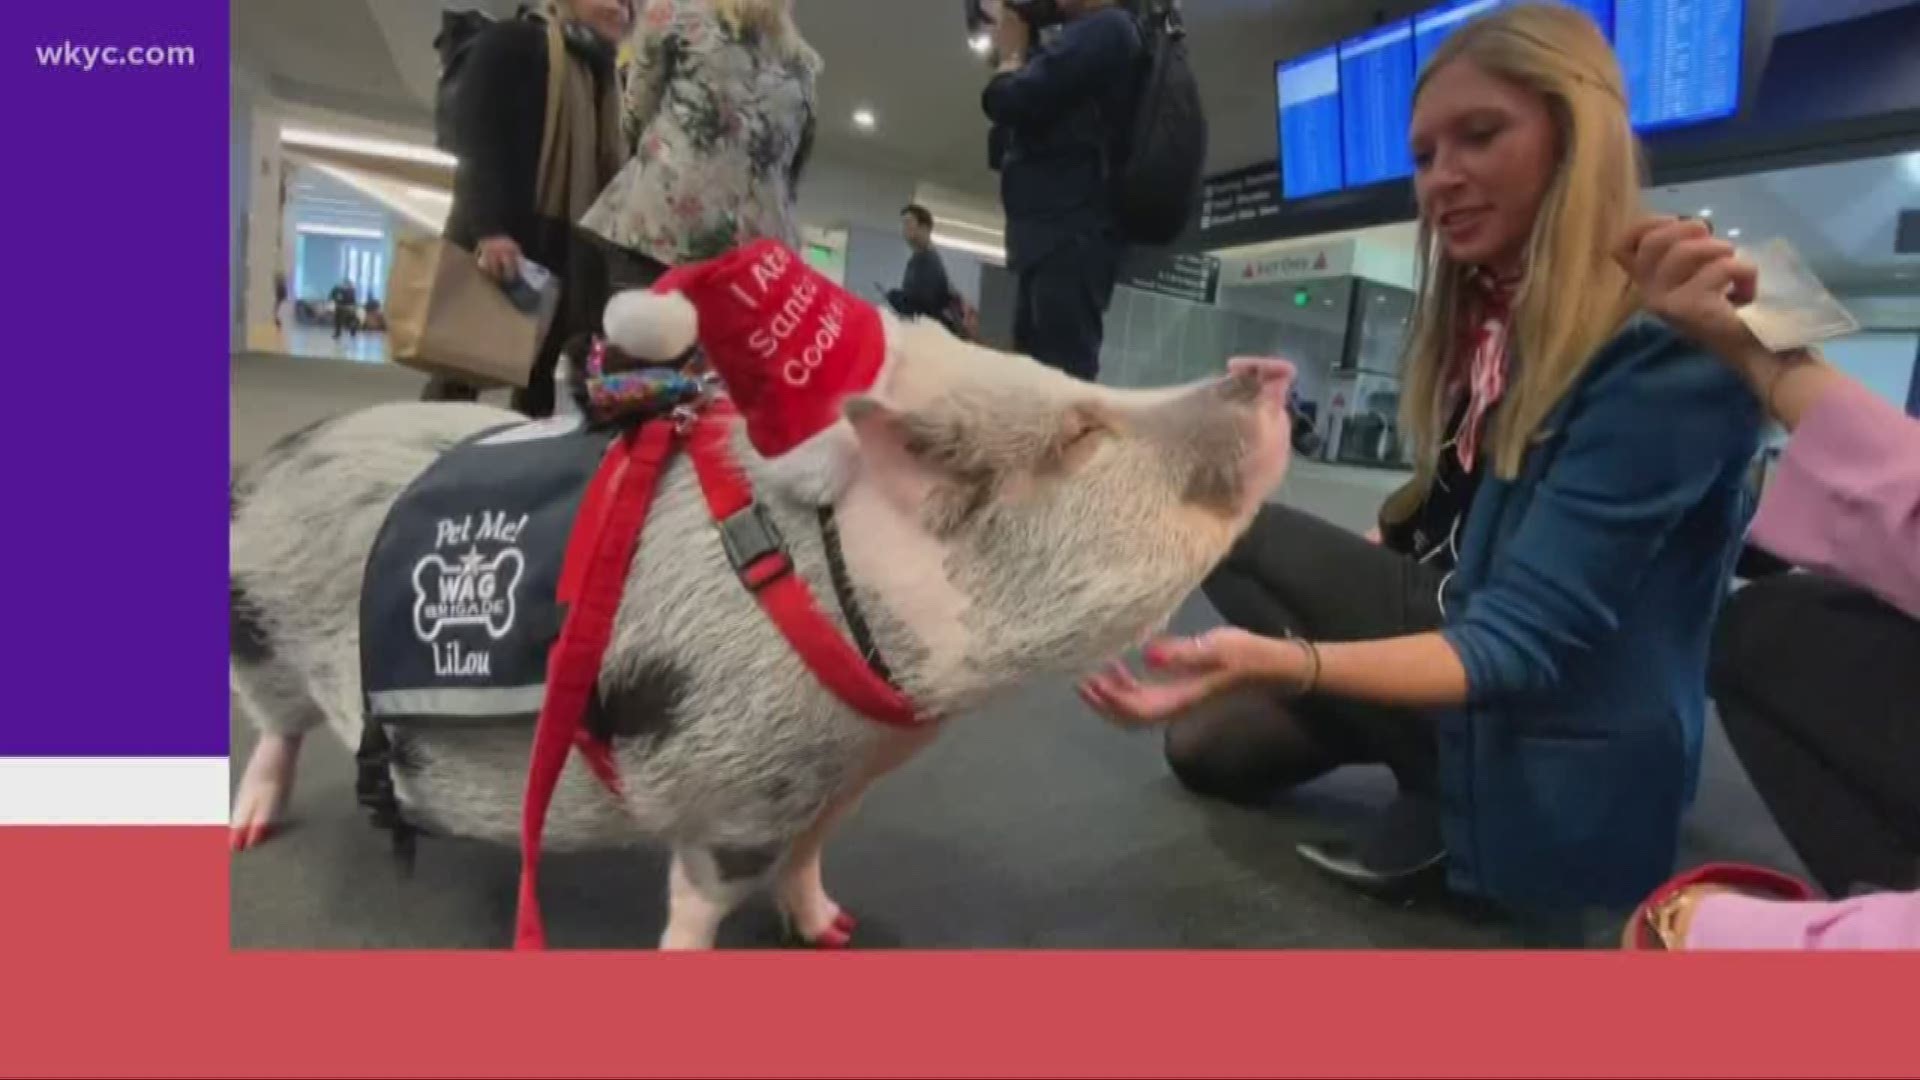 Meet LiLou! This therapy pig works at SFO to ease travelers of their anxiety during the holidays.